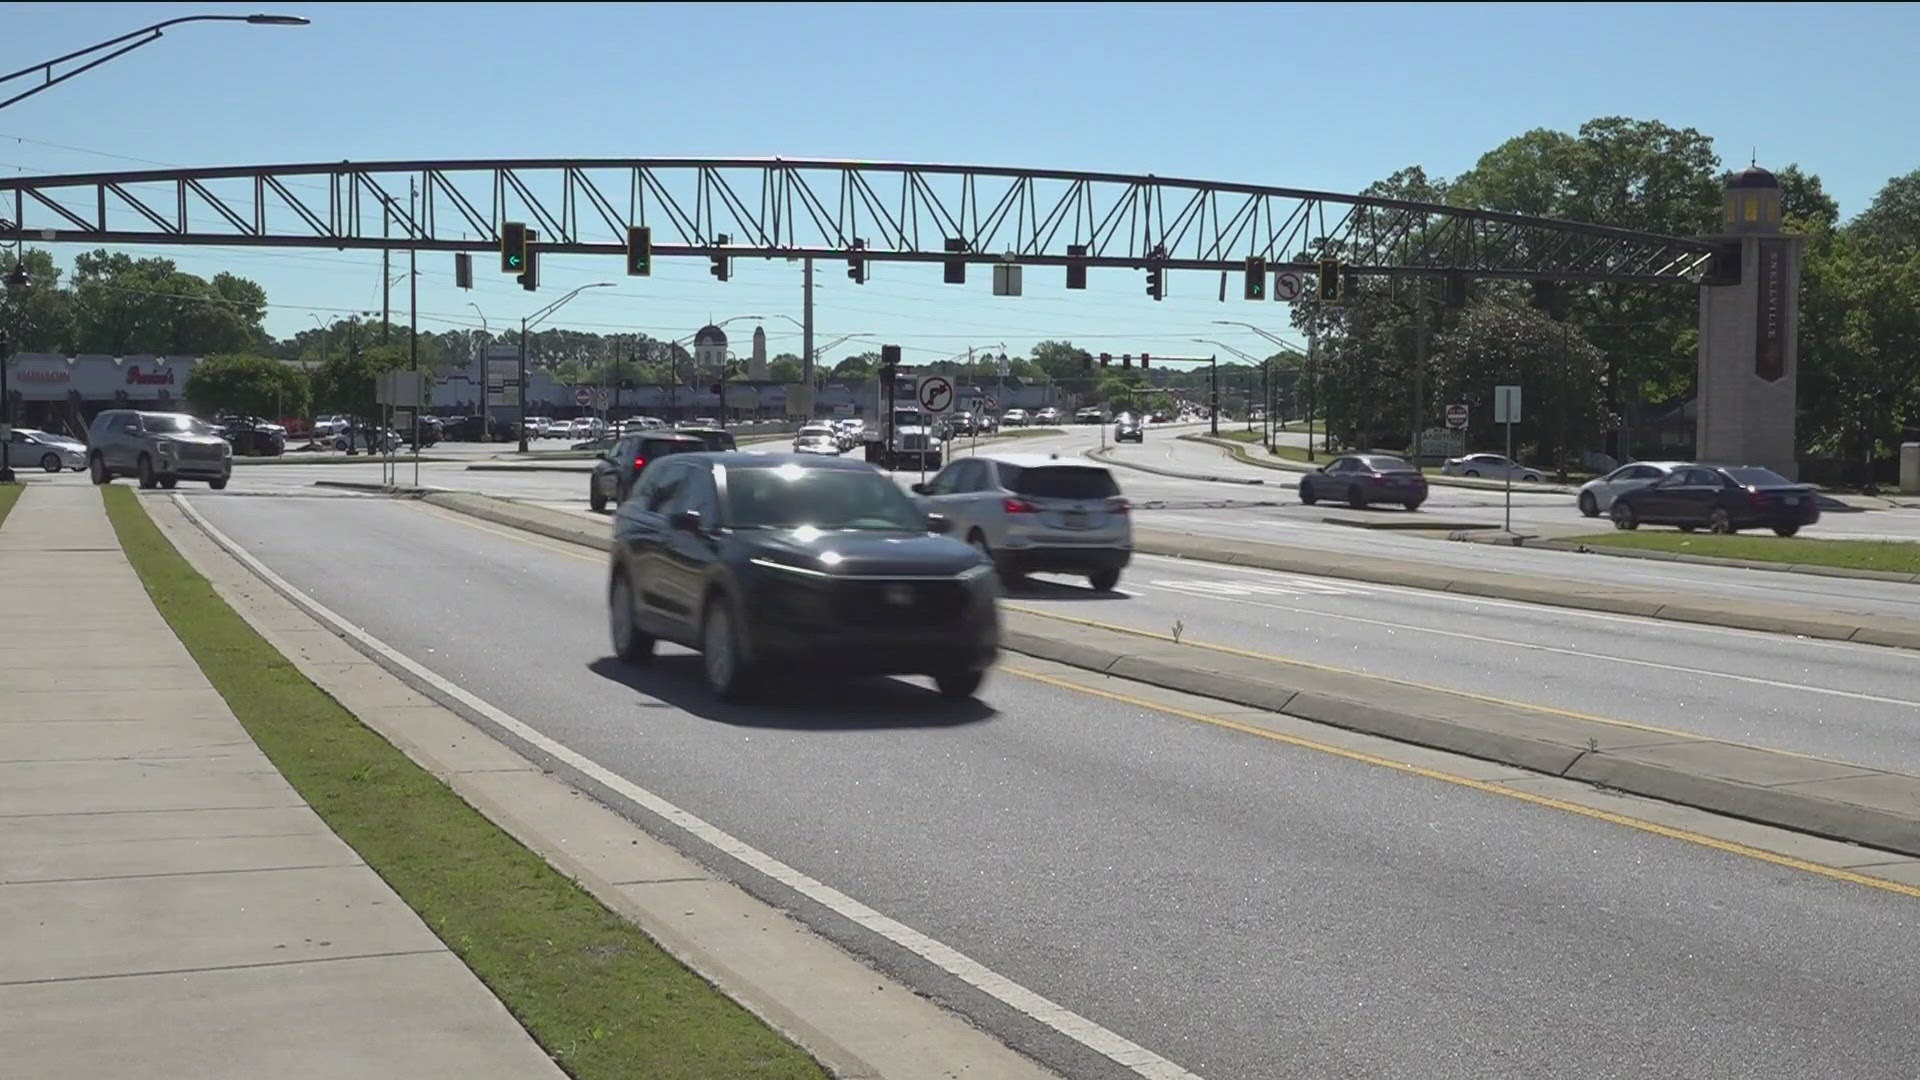 A Displaced Left Turn reduces conflict and crashes according to GDOT